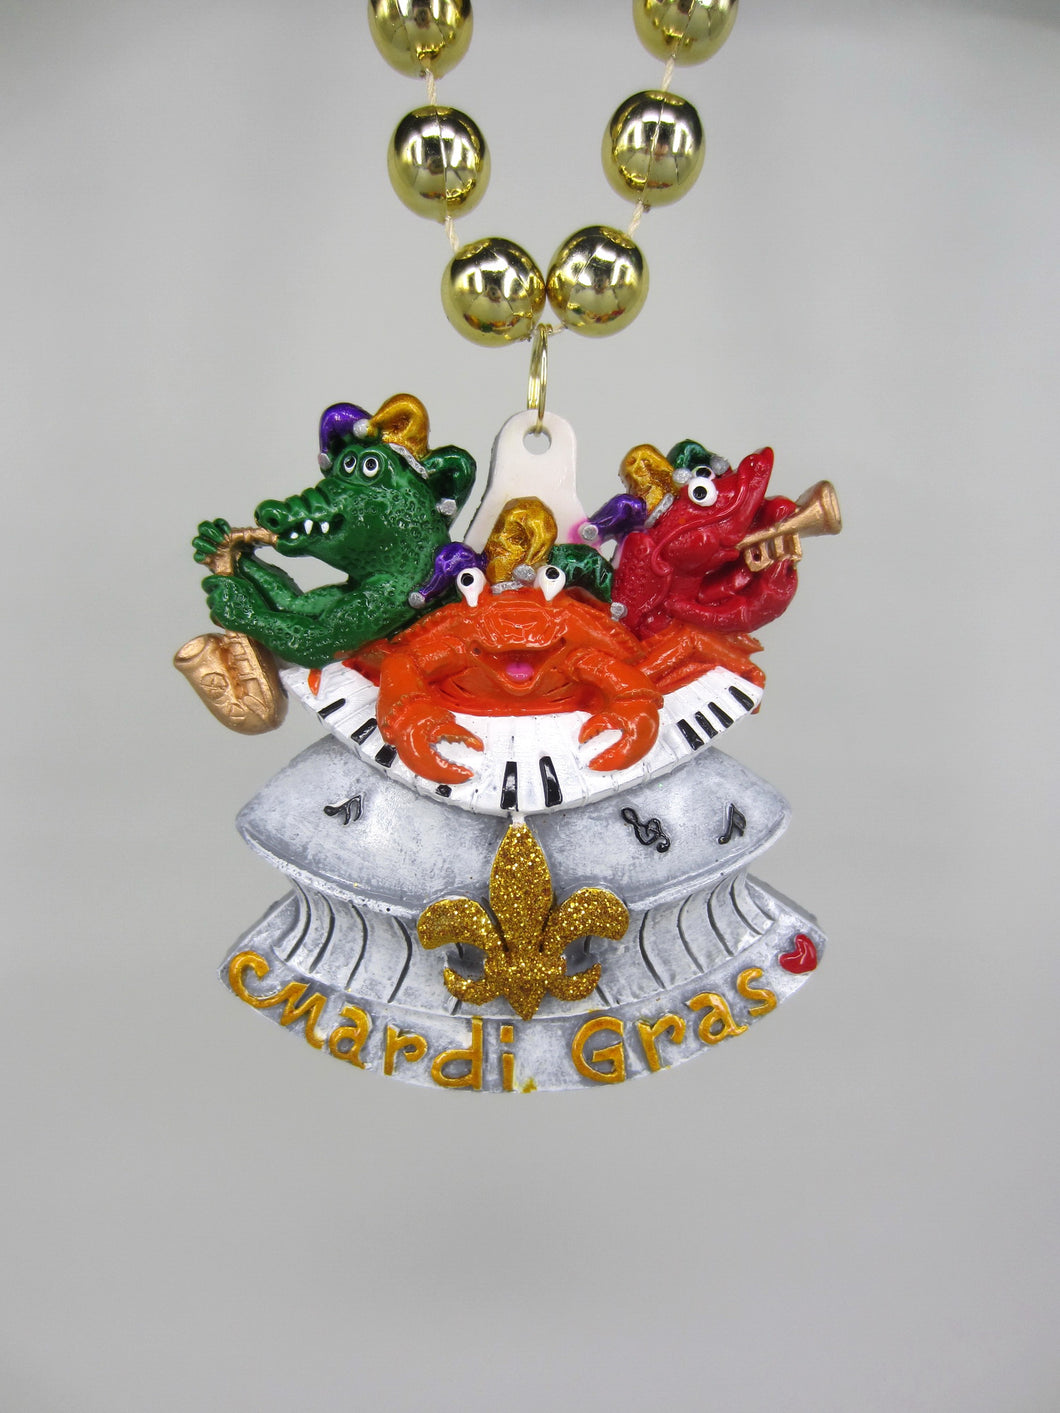 New Orleans Superdome with Mardi Gras Crawfish, Crab and Alligator Band on a Gold Specialty Bead